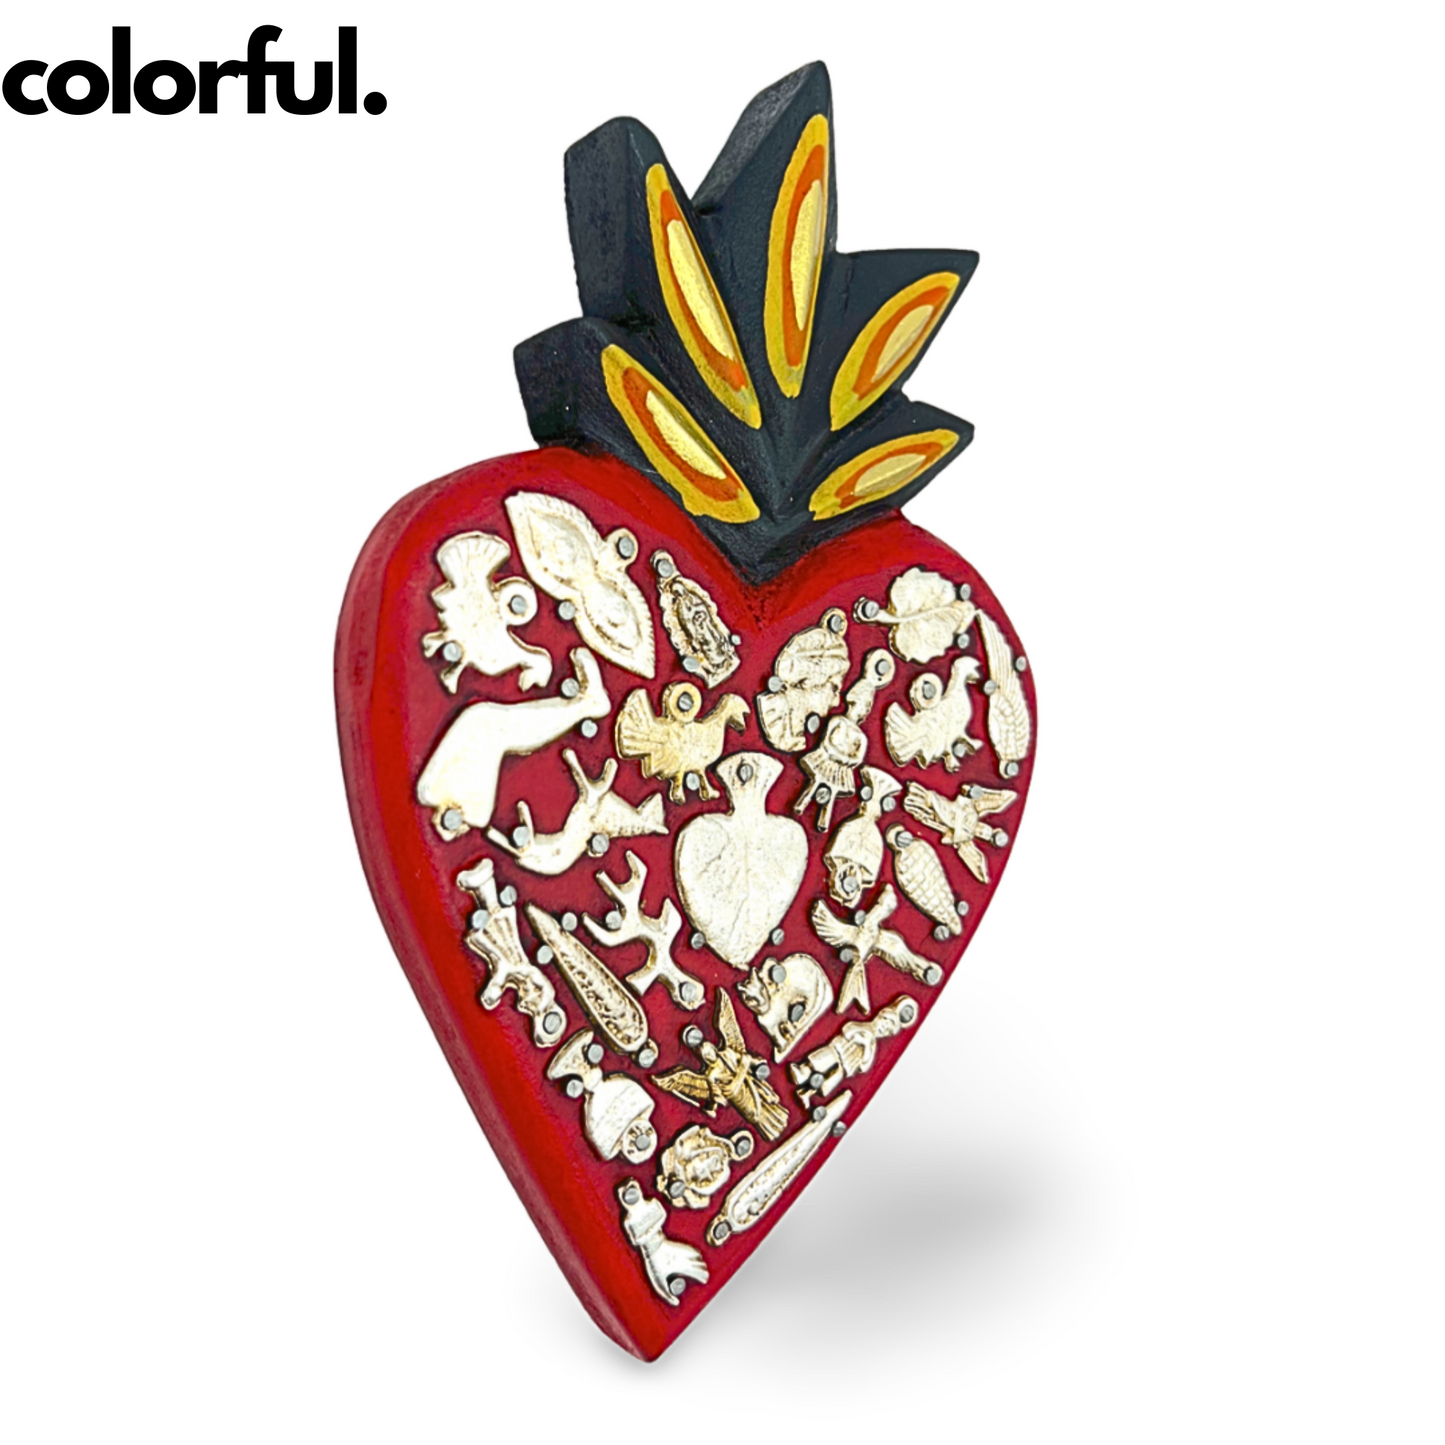 colorful Casa Fiesta Designs' Ex Voto Sacred Heart - Handcrafted and Hand-painted Mexican Milagros Wall Decor.